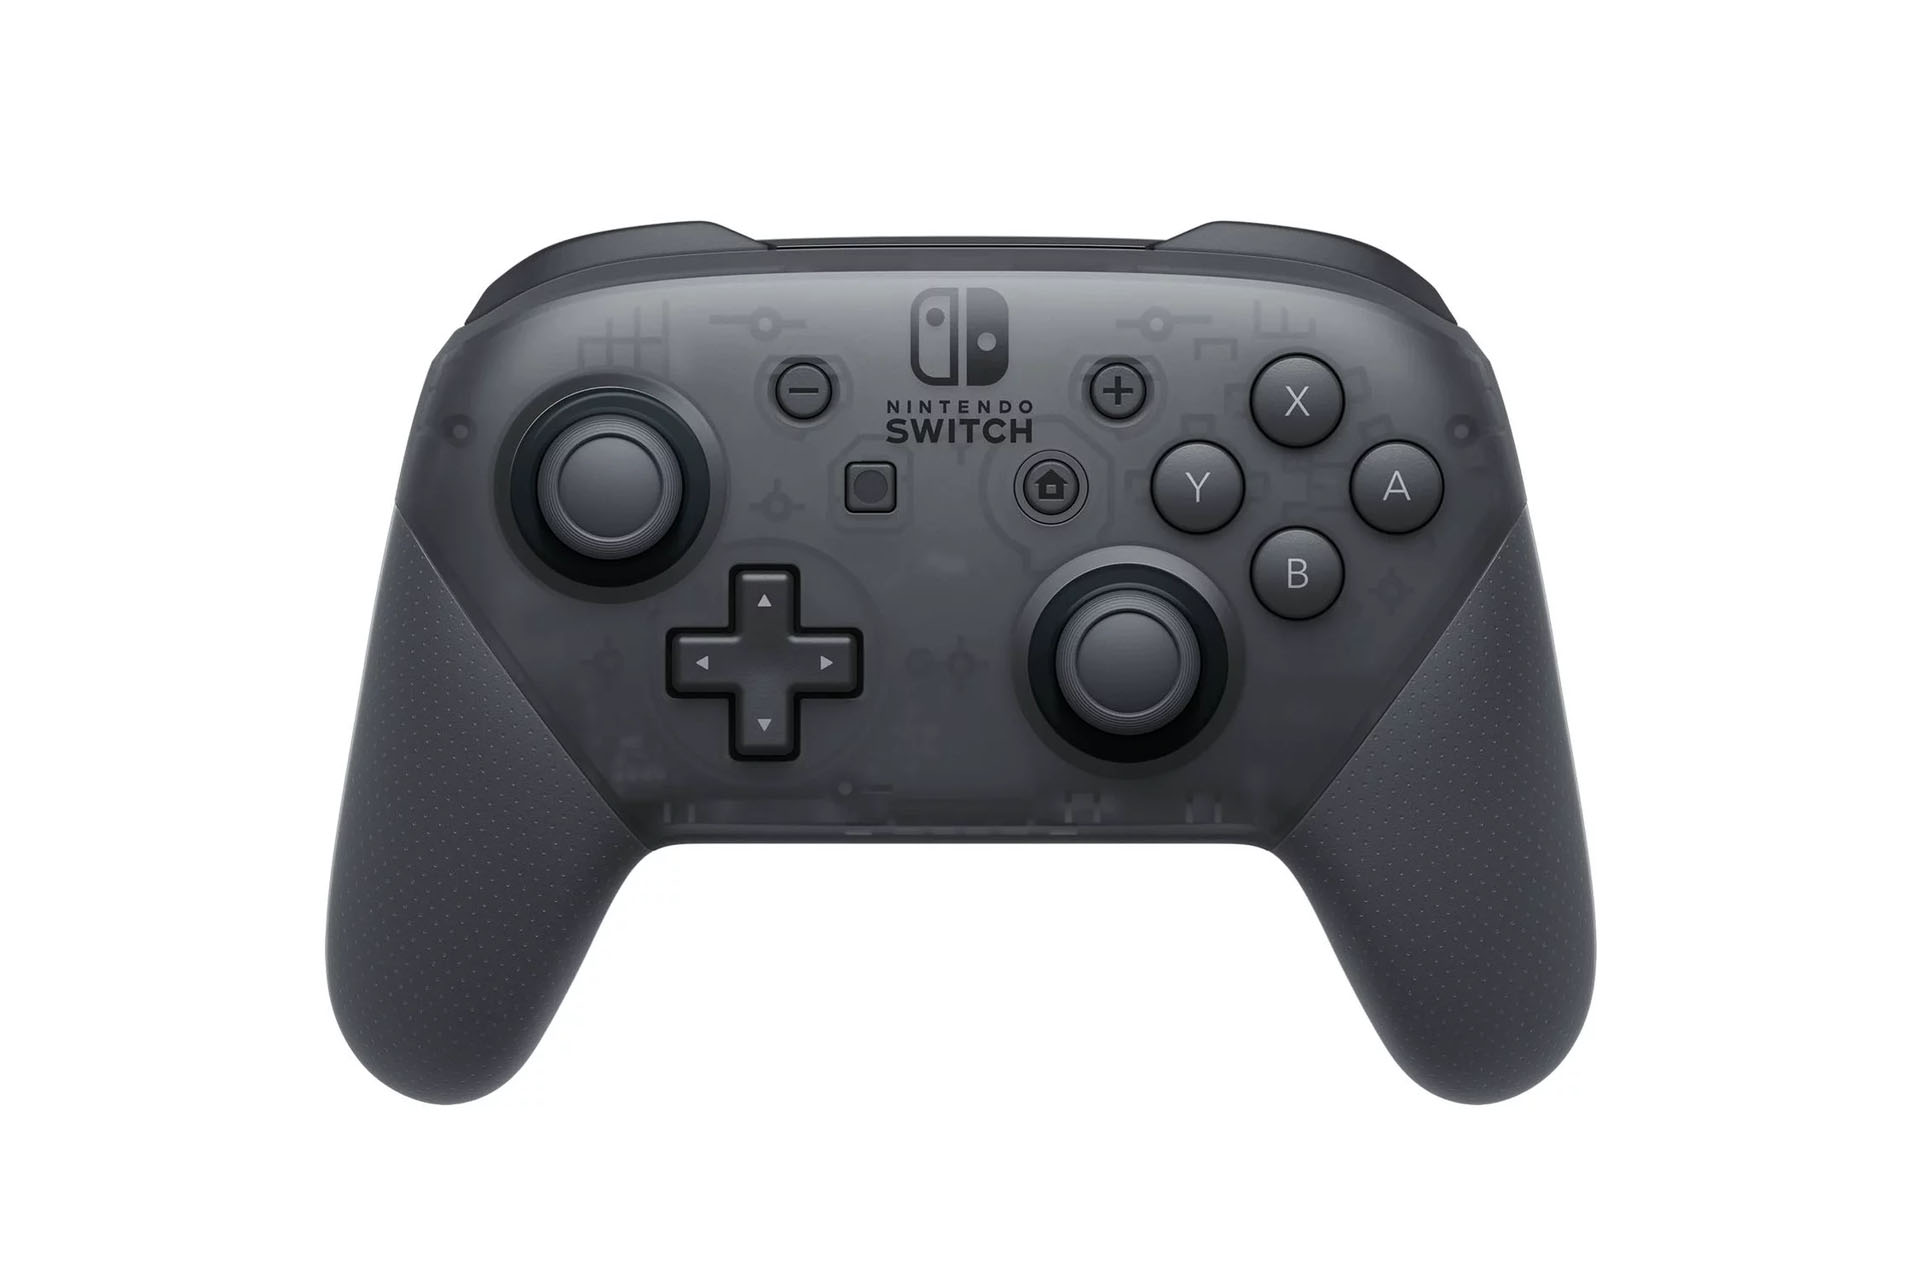 A product shot of the Nintendo Switch Pro controller on a white background